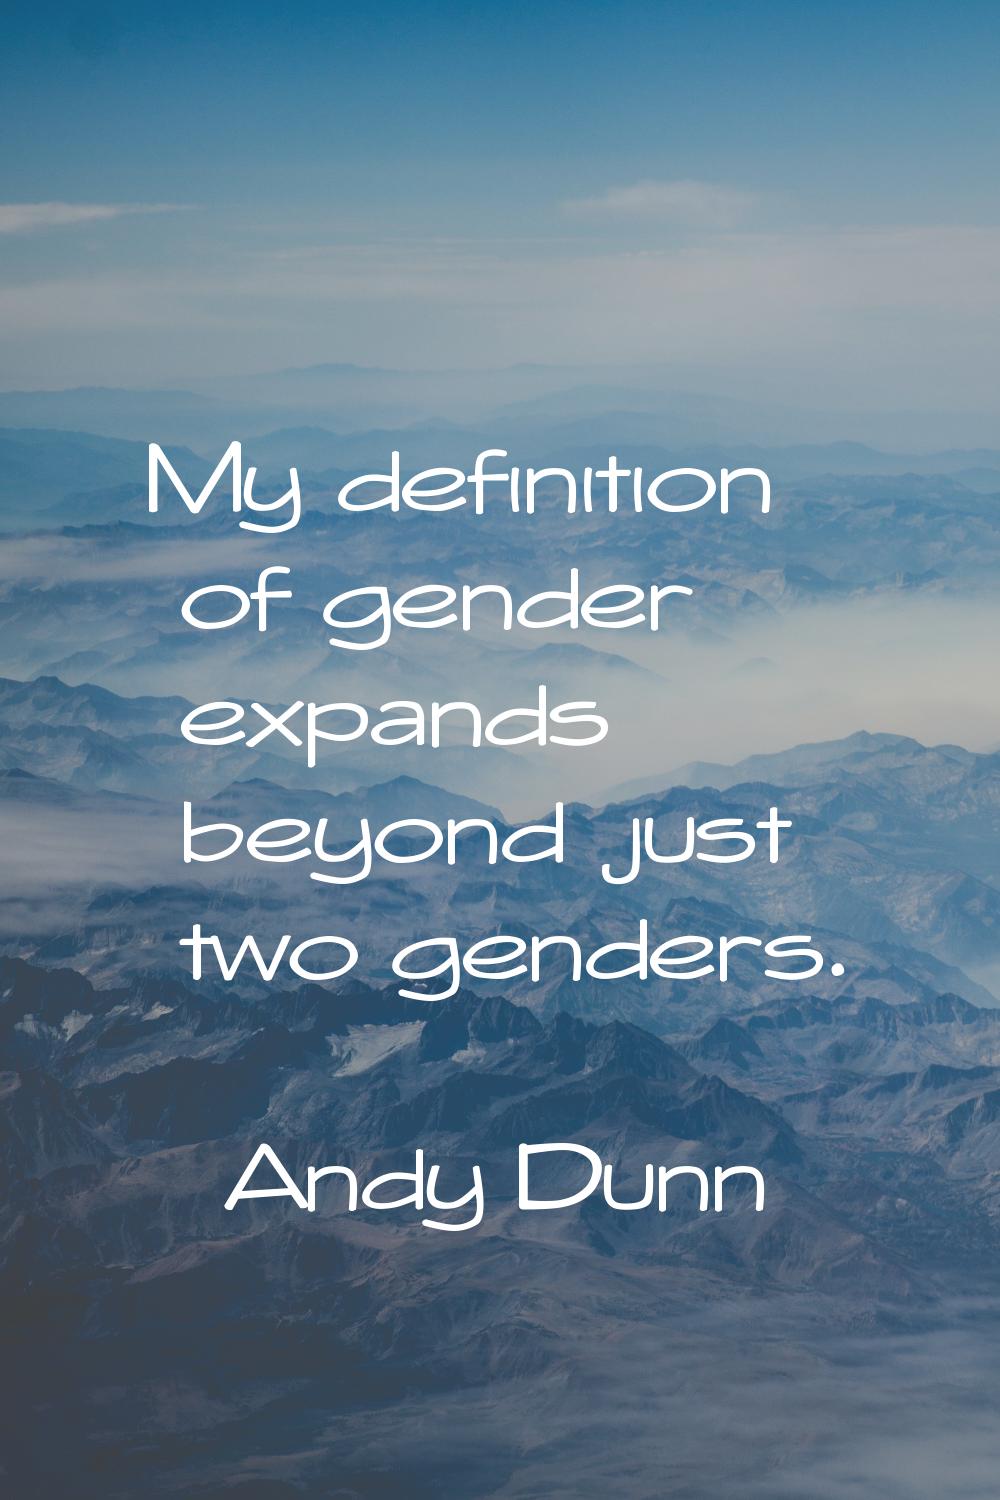 My definition of gender expands beyond just two genders.